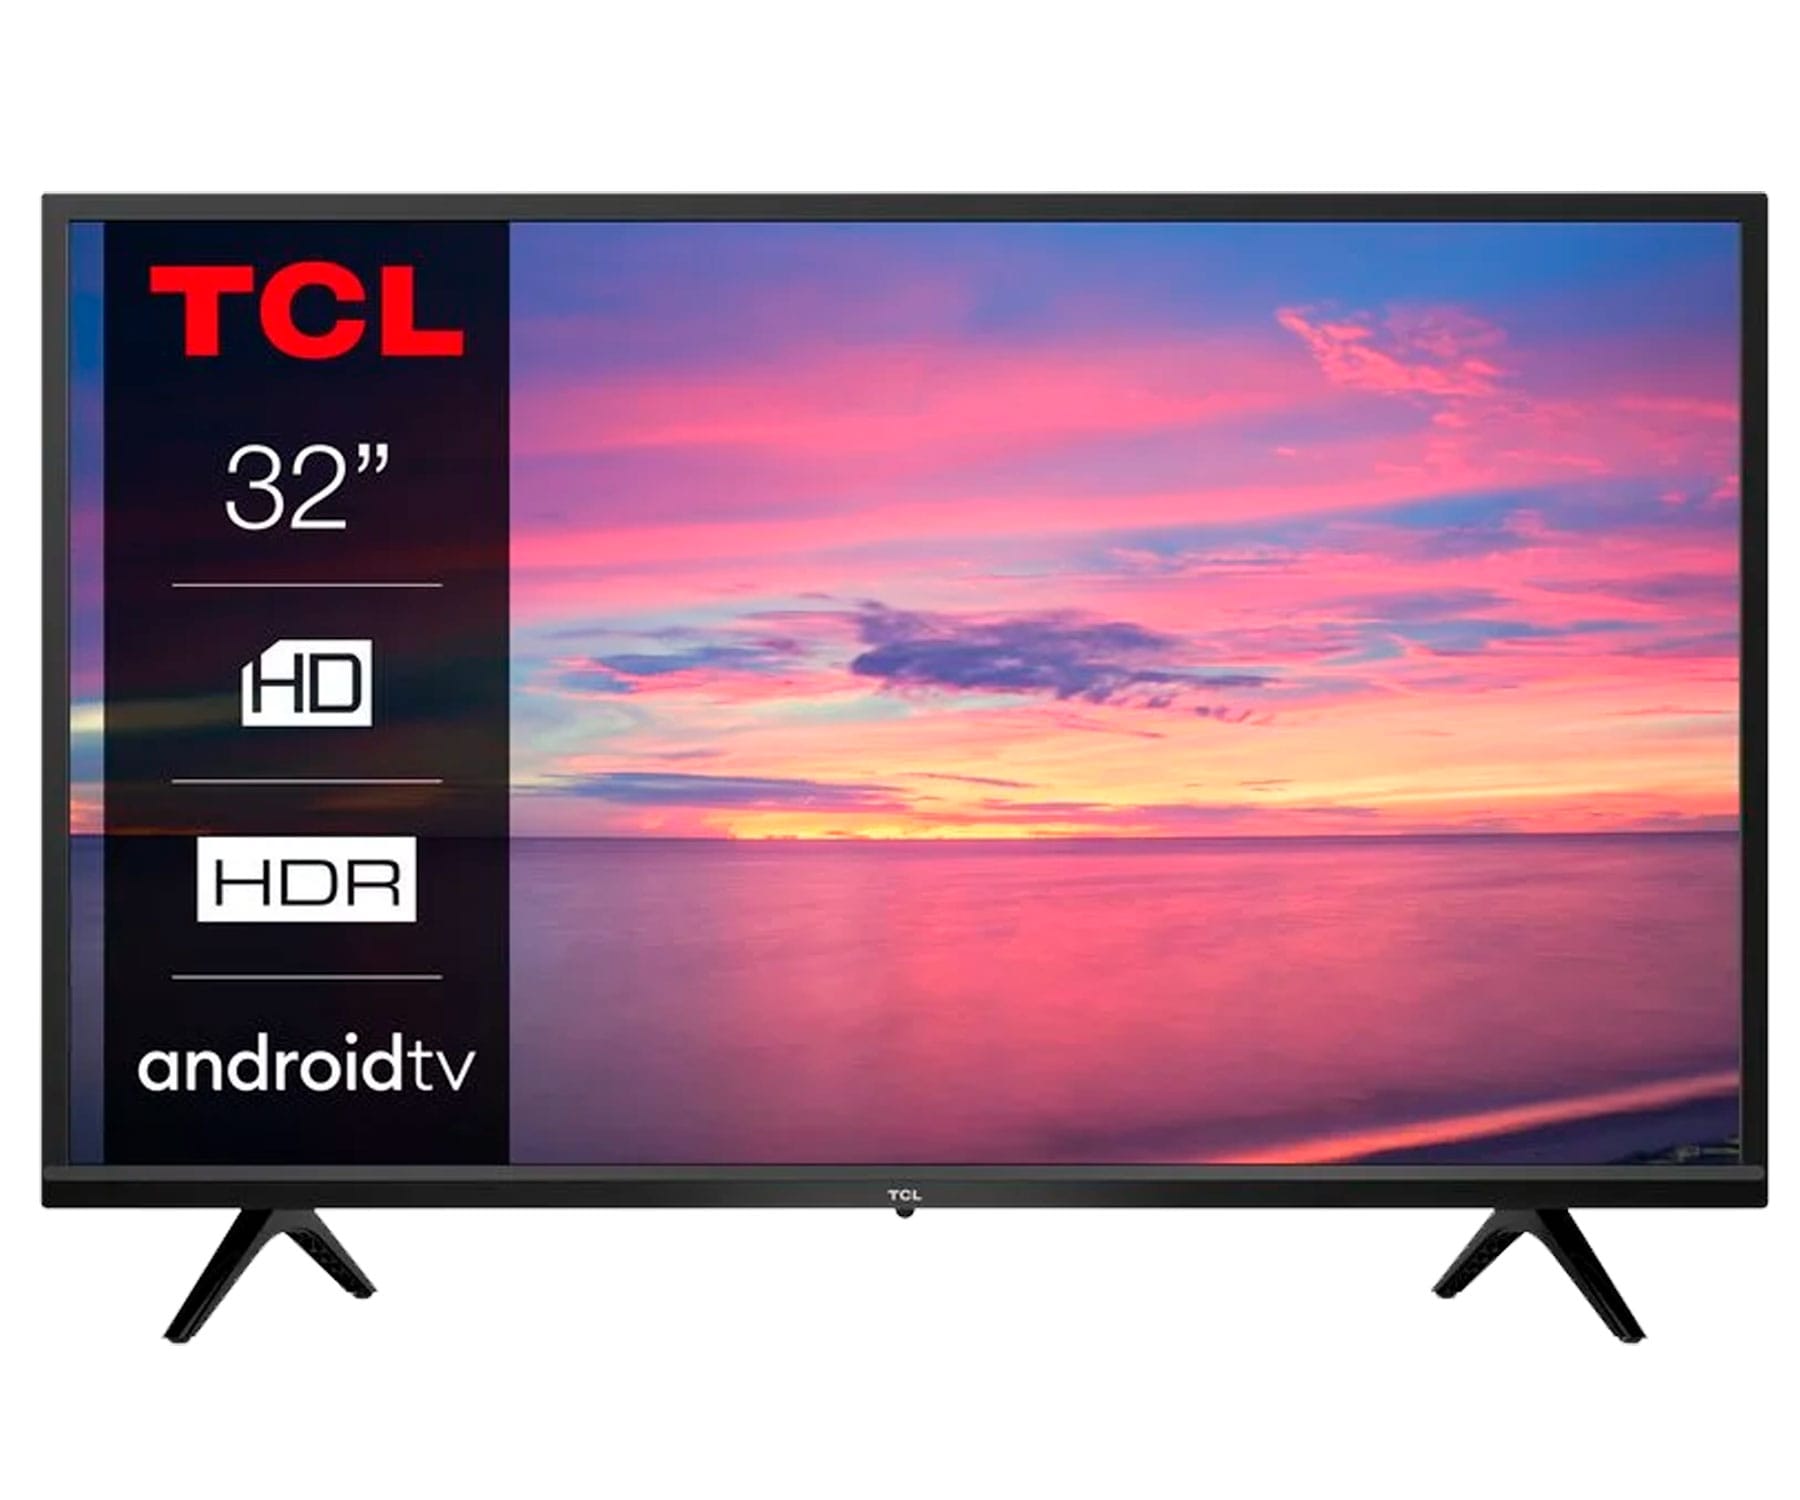 TCL 32S5200 Televisor Android TV 32" HD HDR